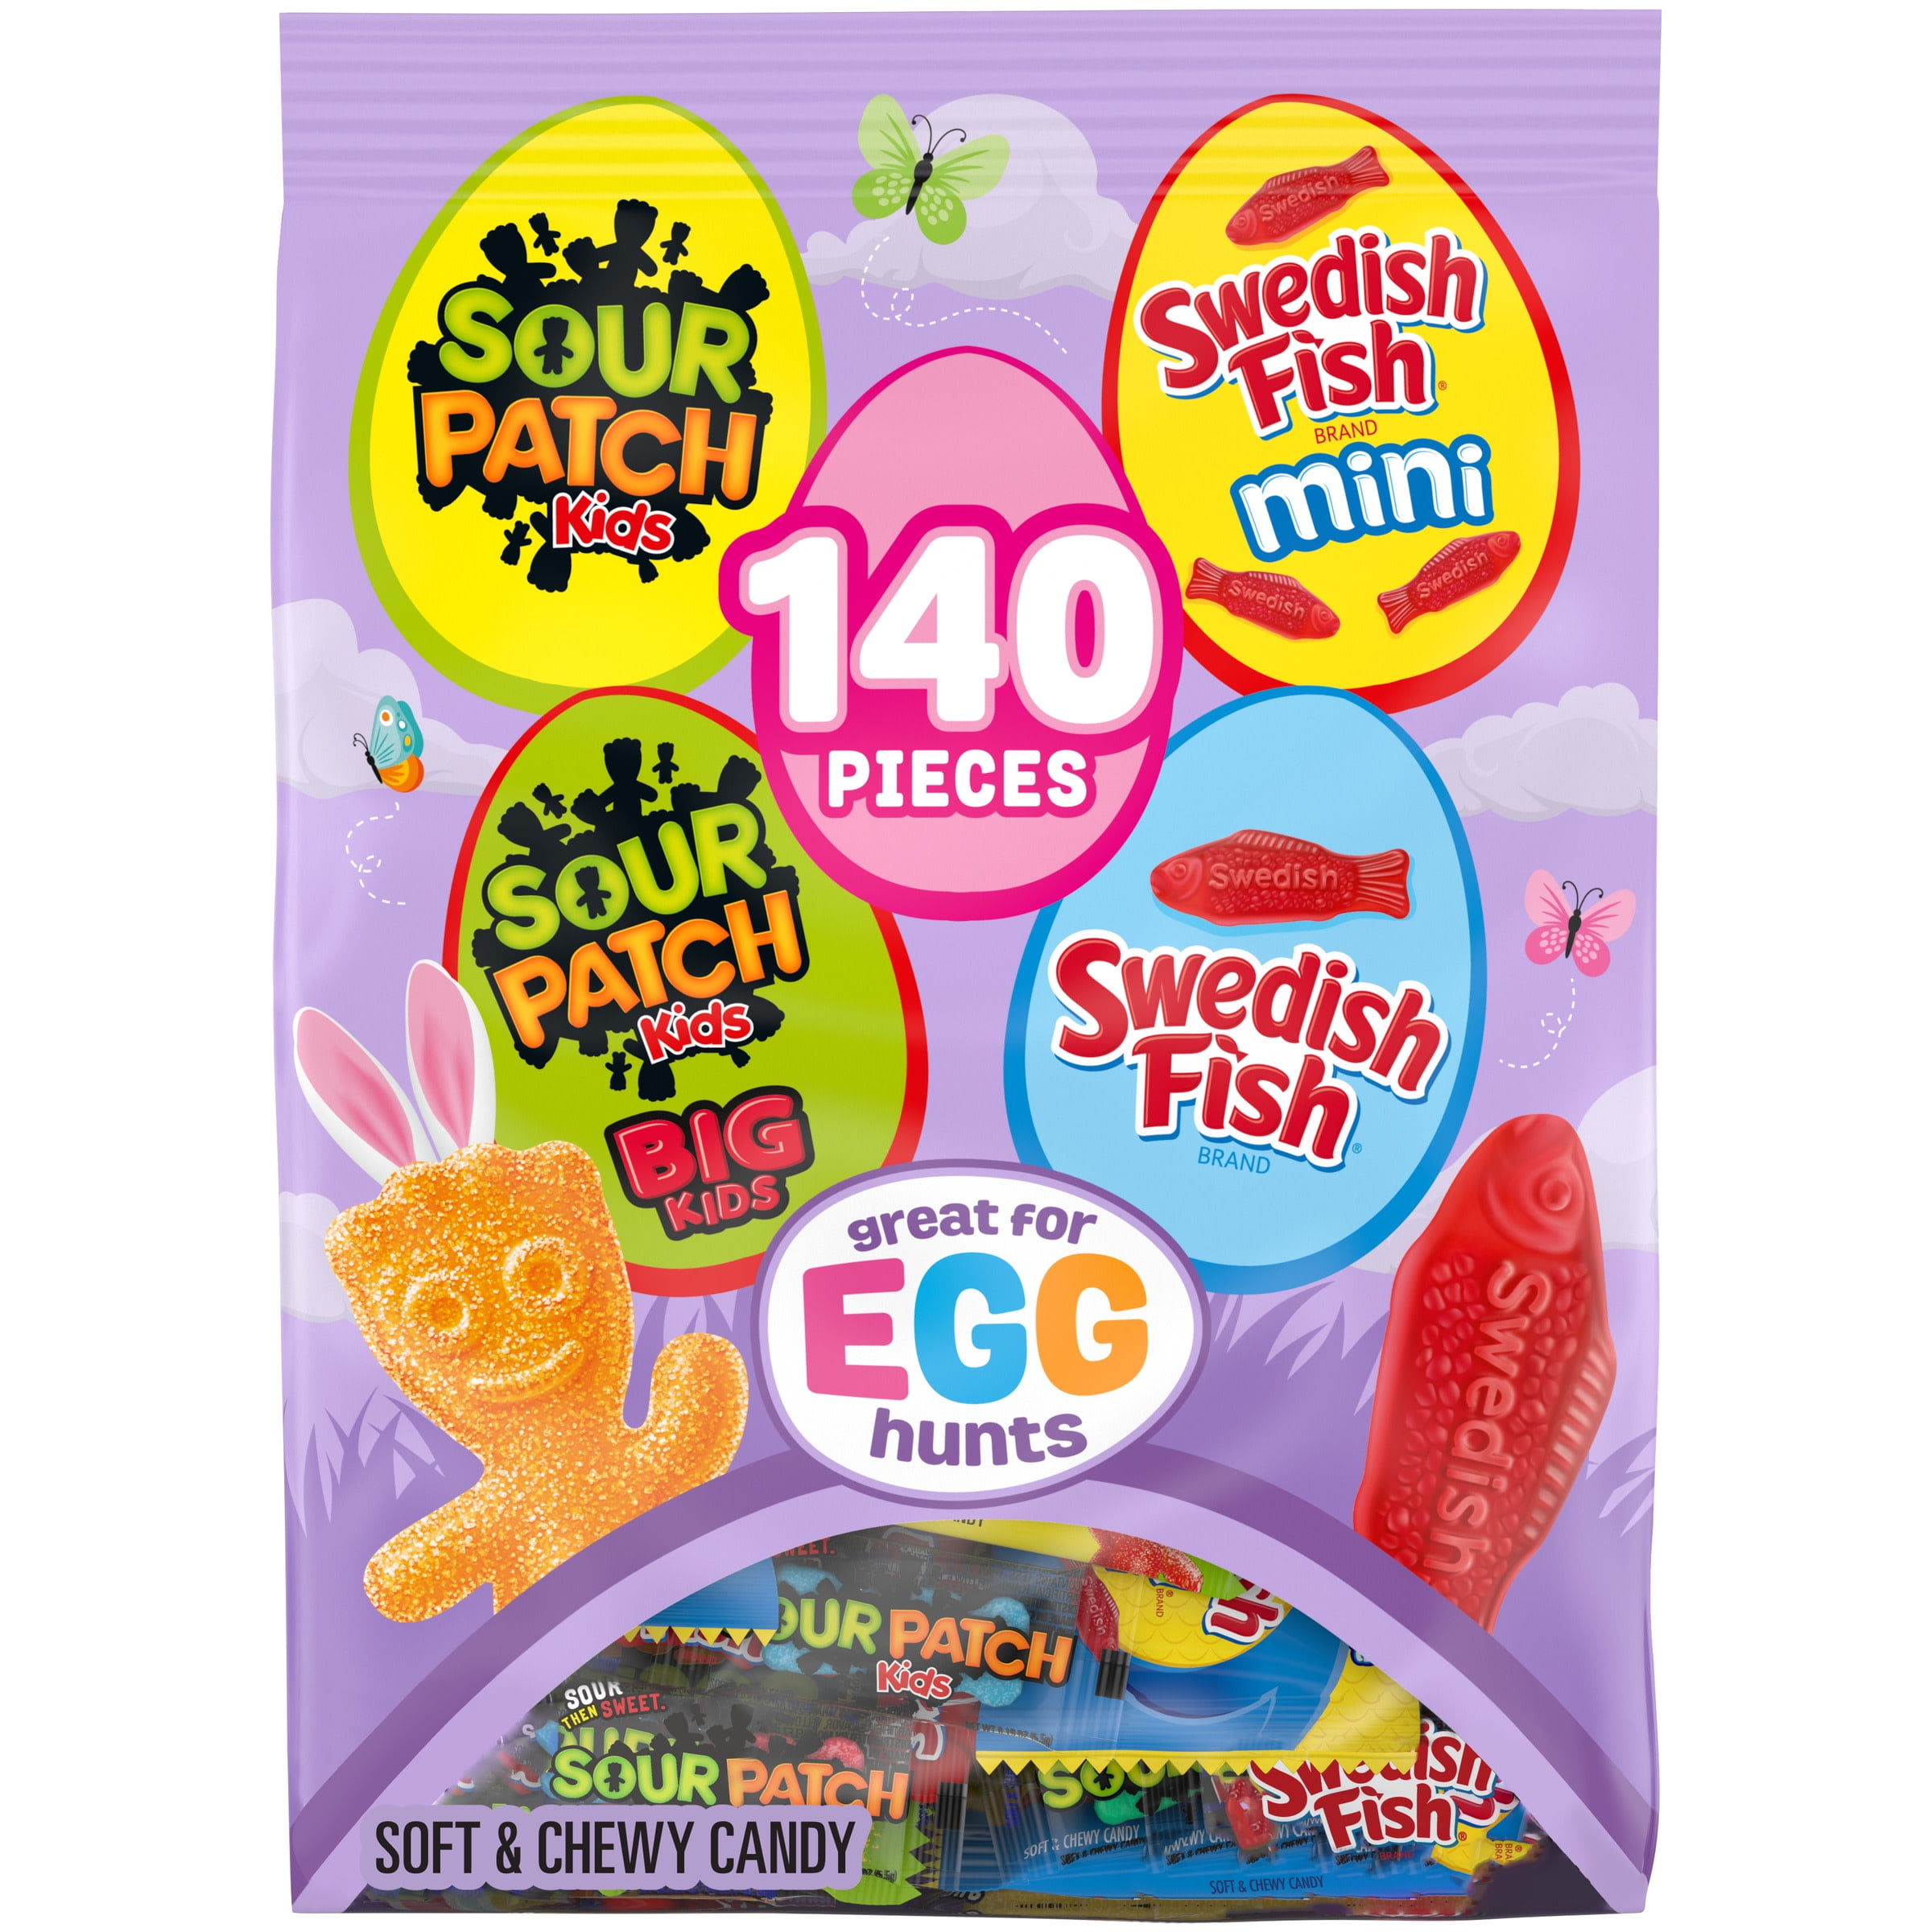 SOUR PATCH KIDS and SWEDISH FISH Soft & Chewy Candy, Easter Candy Variety Pack, 140 Snack Packs